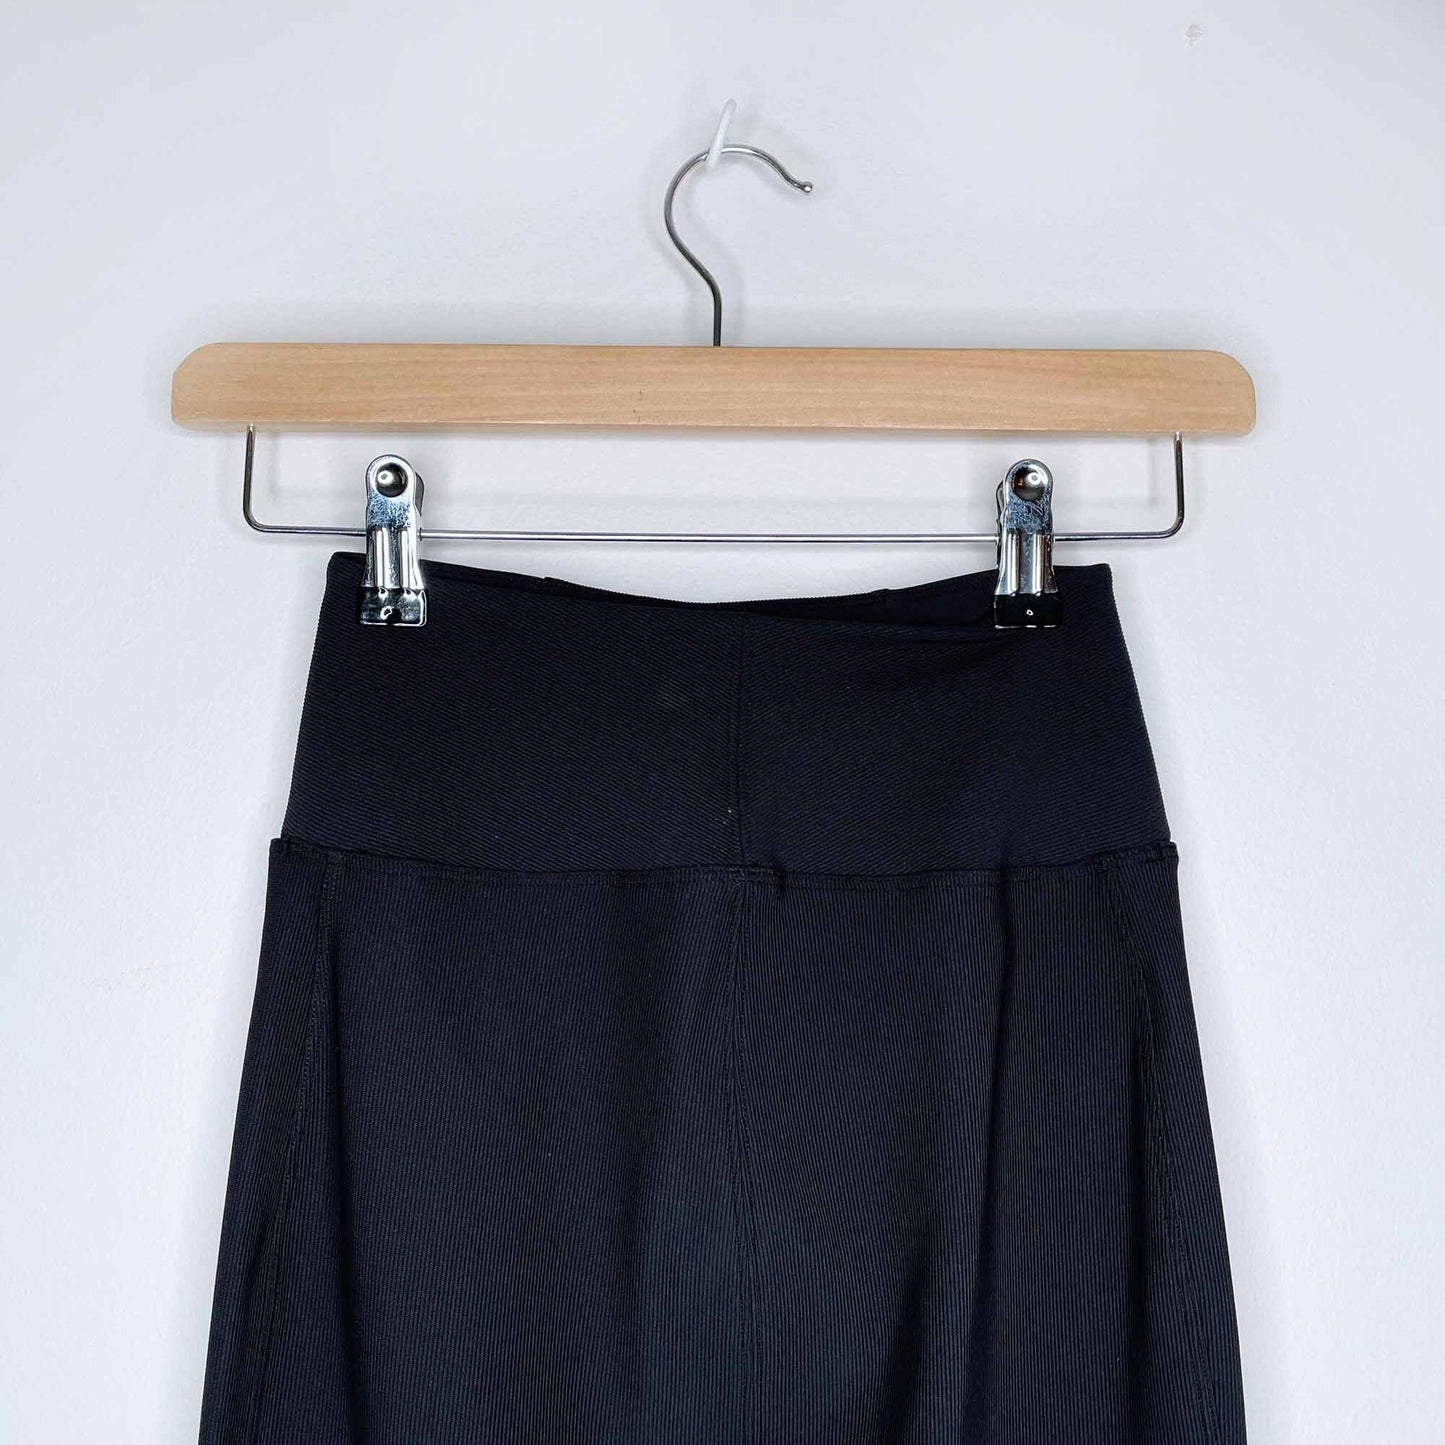 NWT lululemon a new route ribbed stretch skirt - size 0